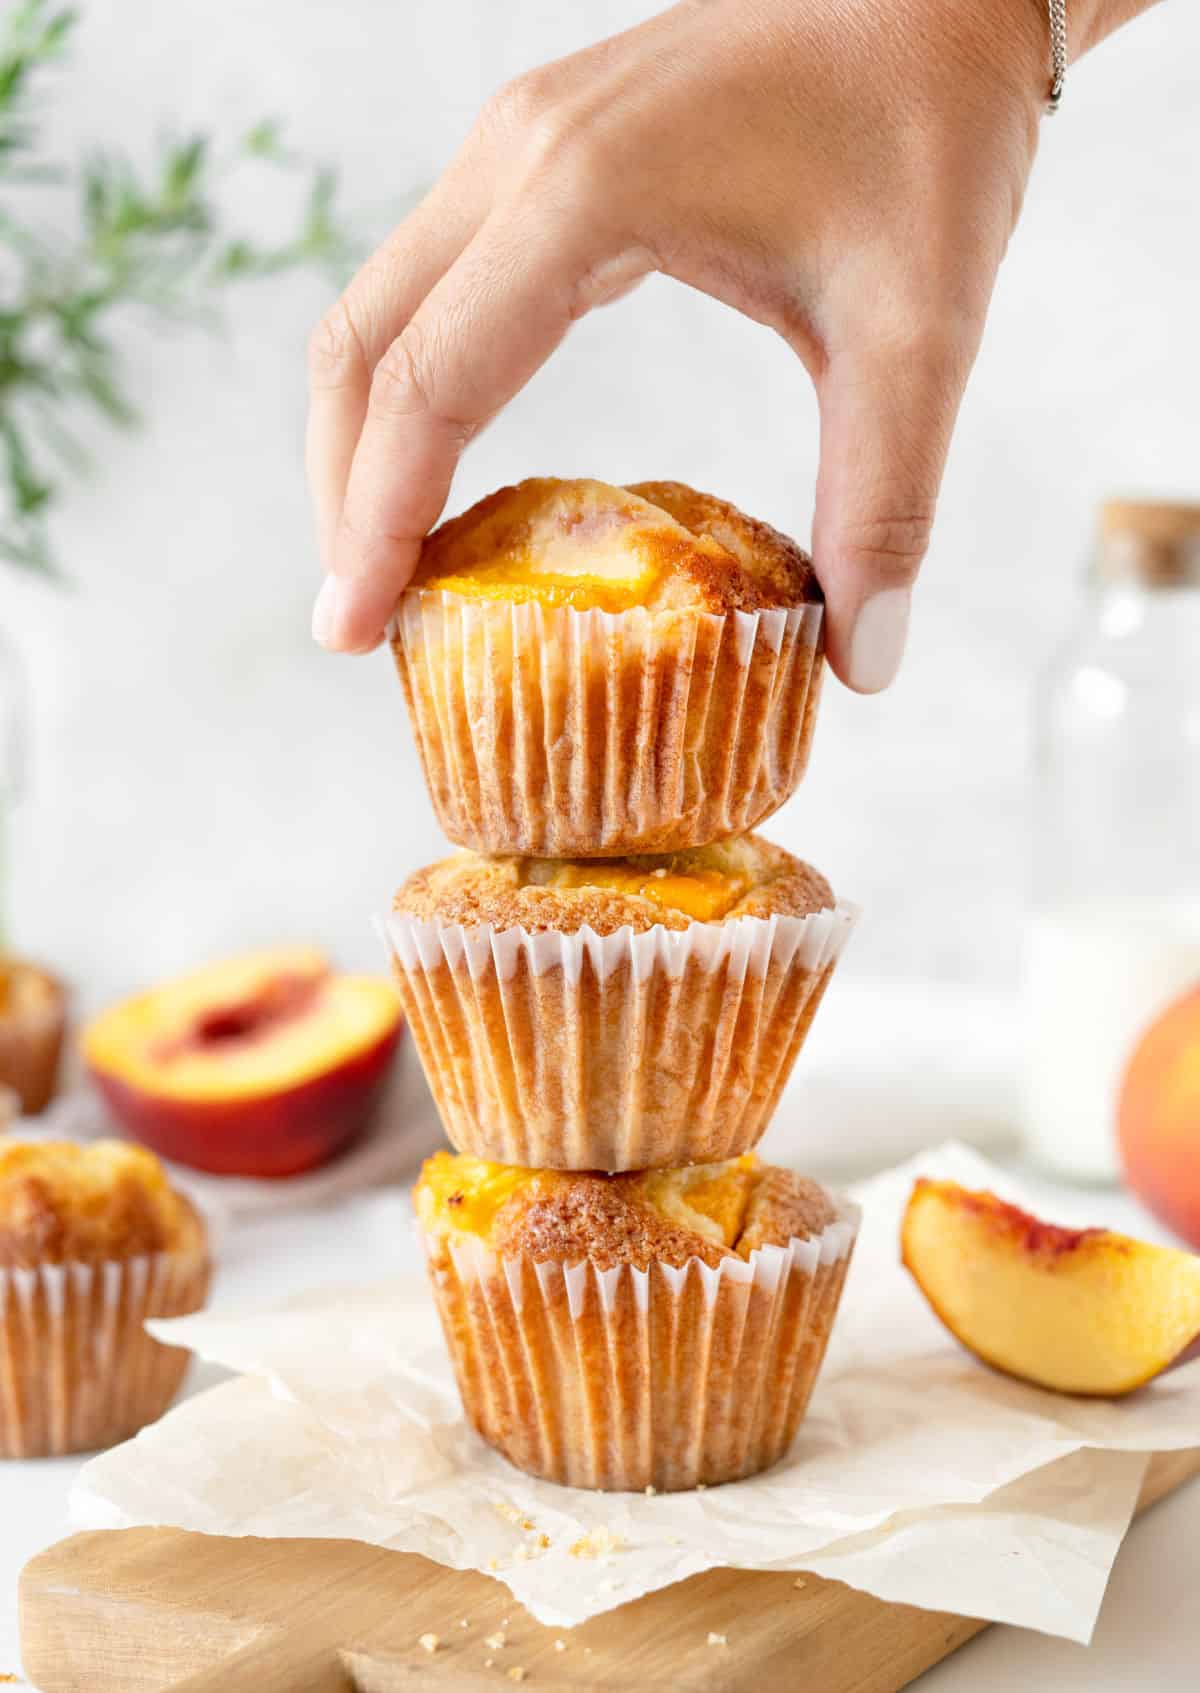 A hand picking top peach muffin from a stack on parchment paper. Fresh peach slices around, grey background.